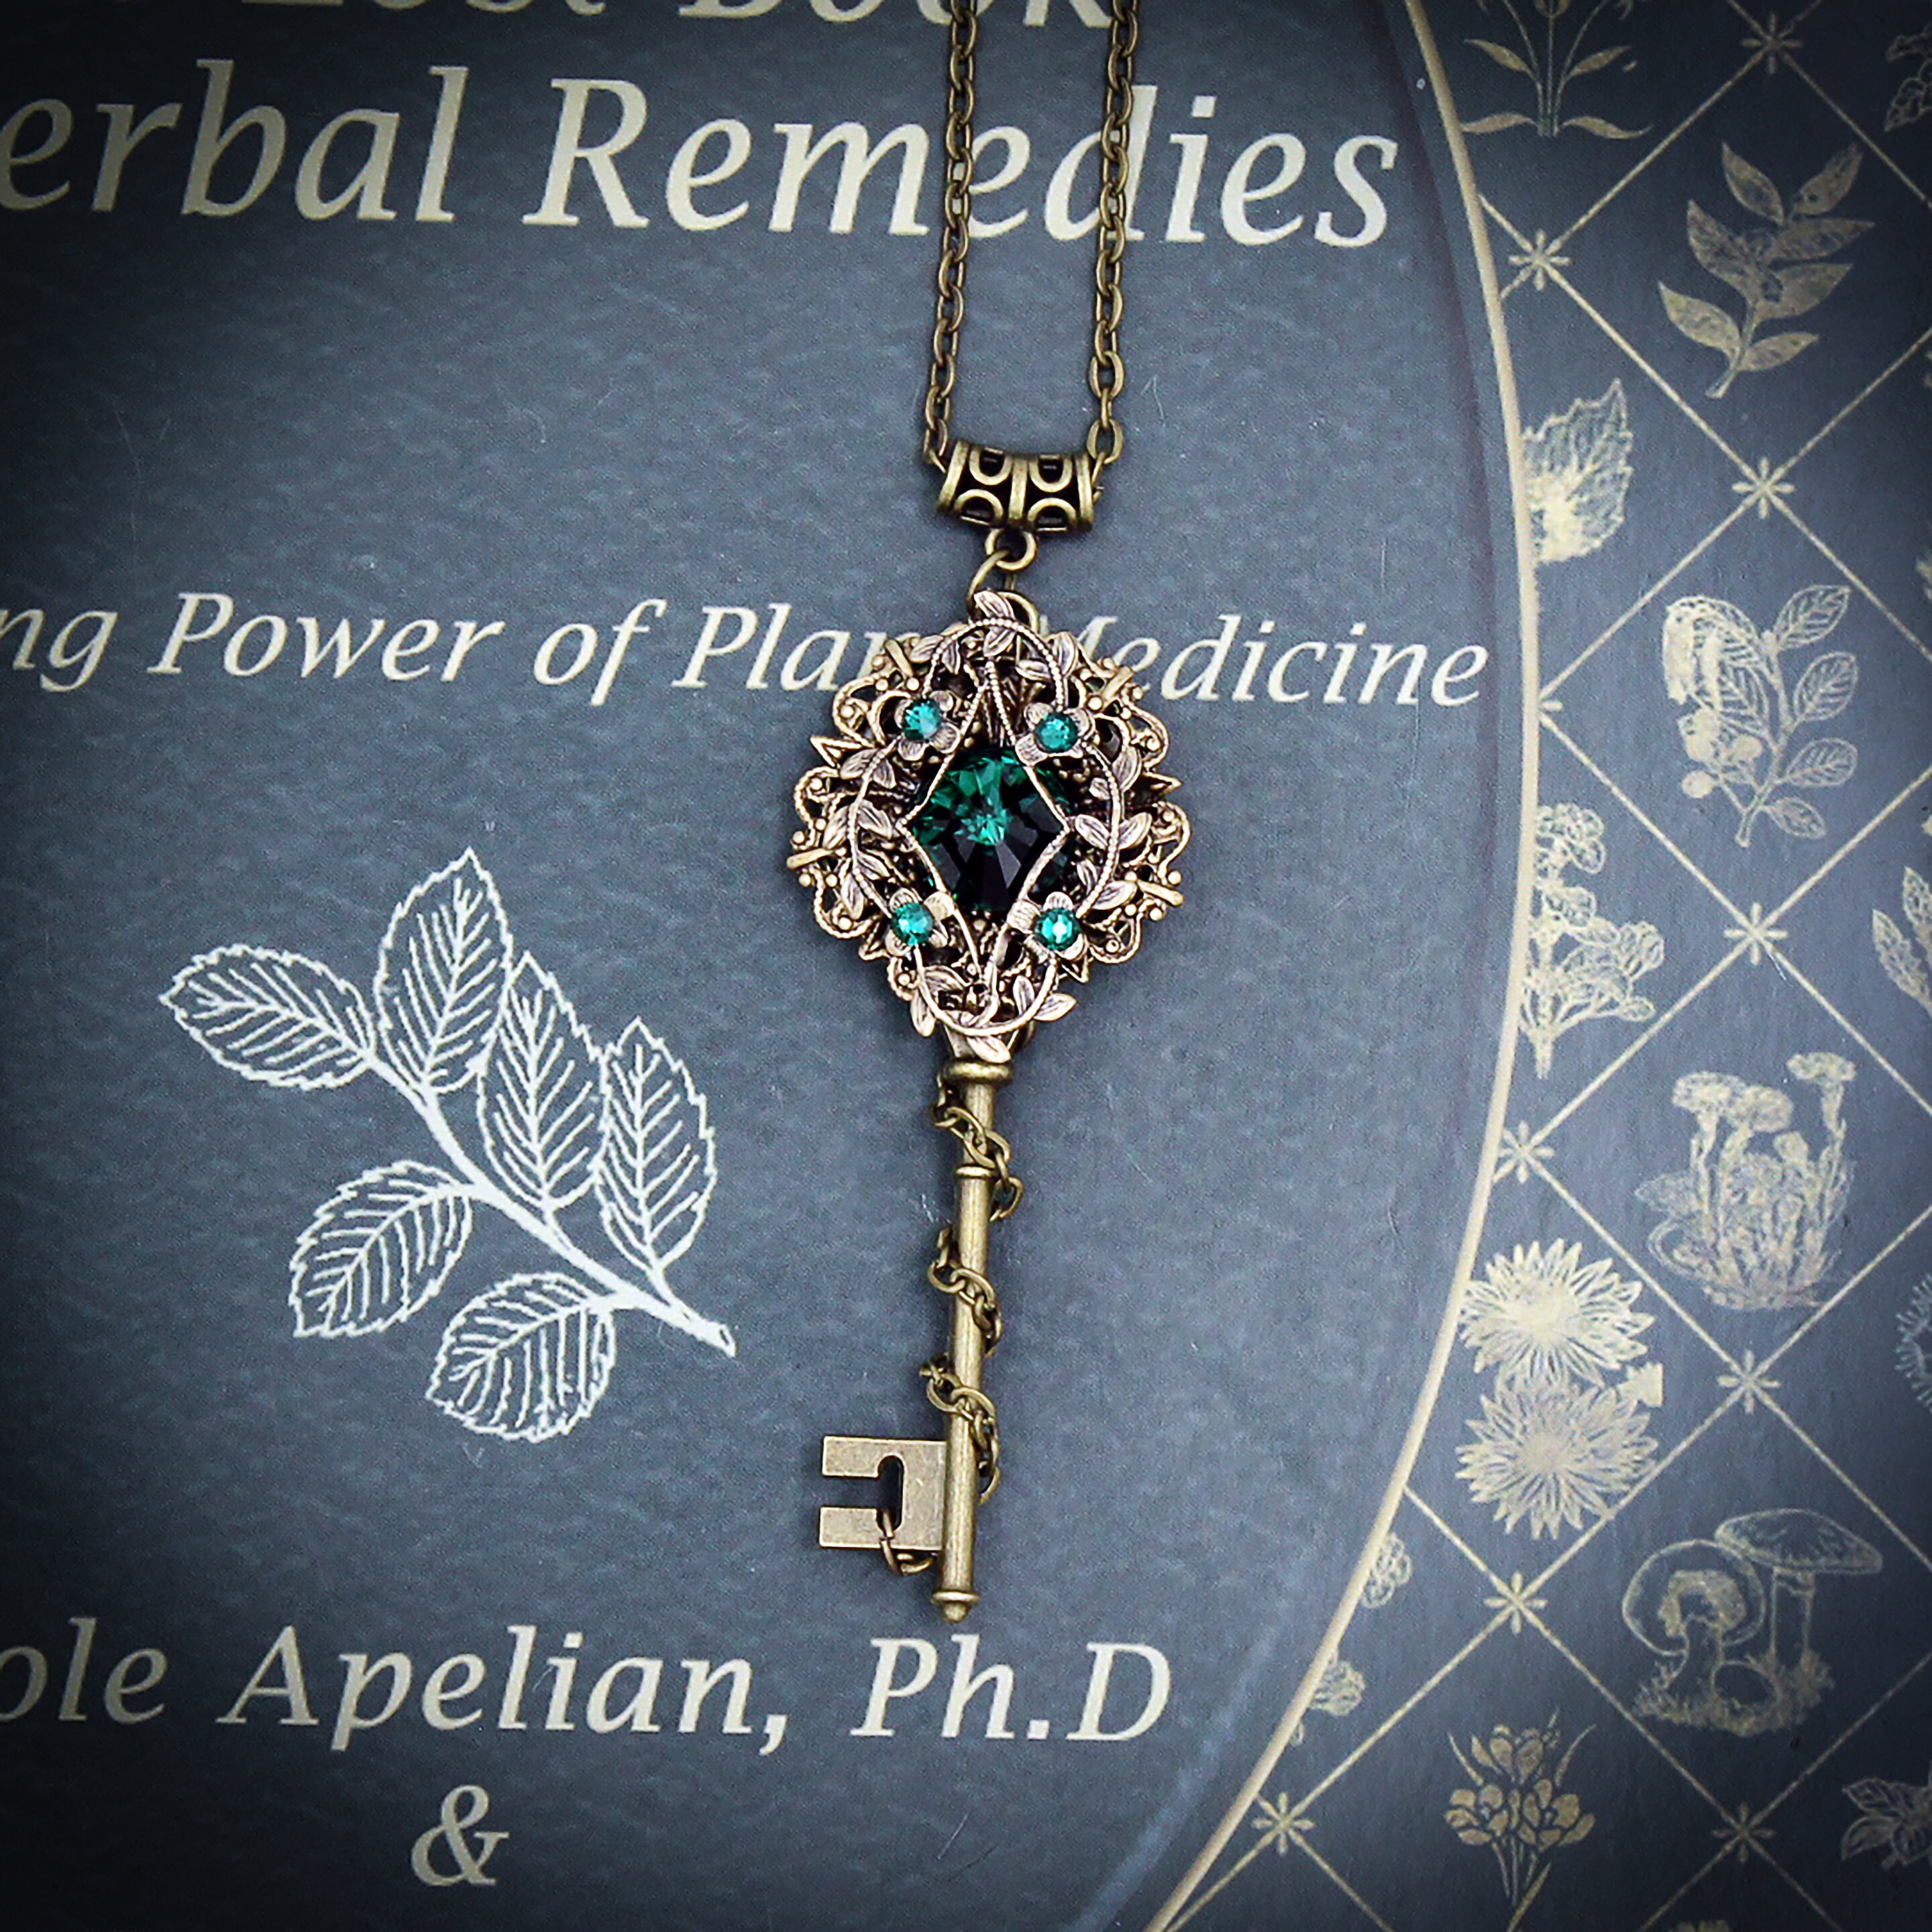 Brass Key to Your Heart Fantasy Necklace With Fairy and Swarovski